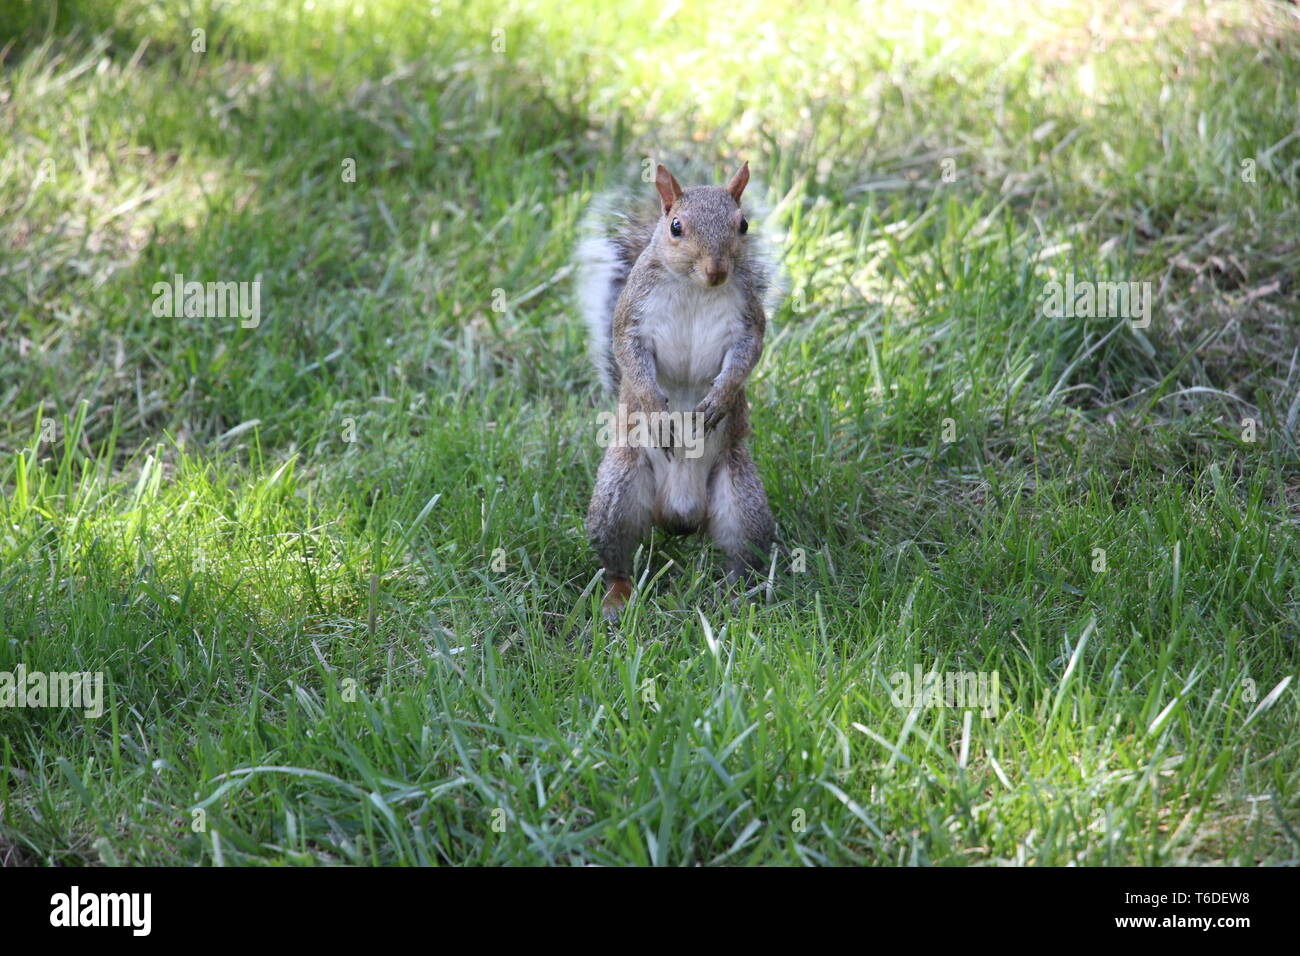 Cute Squirrel standing up Stock Photo